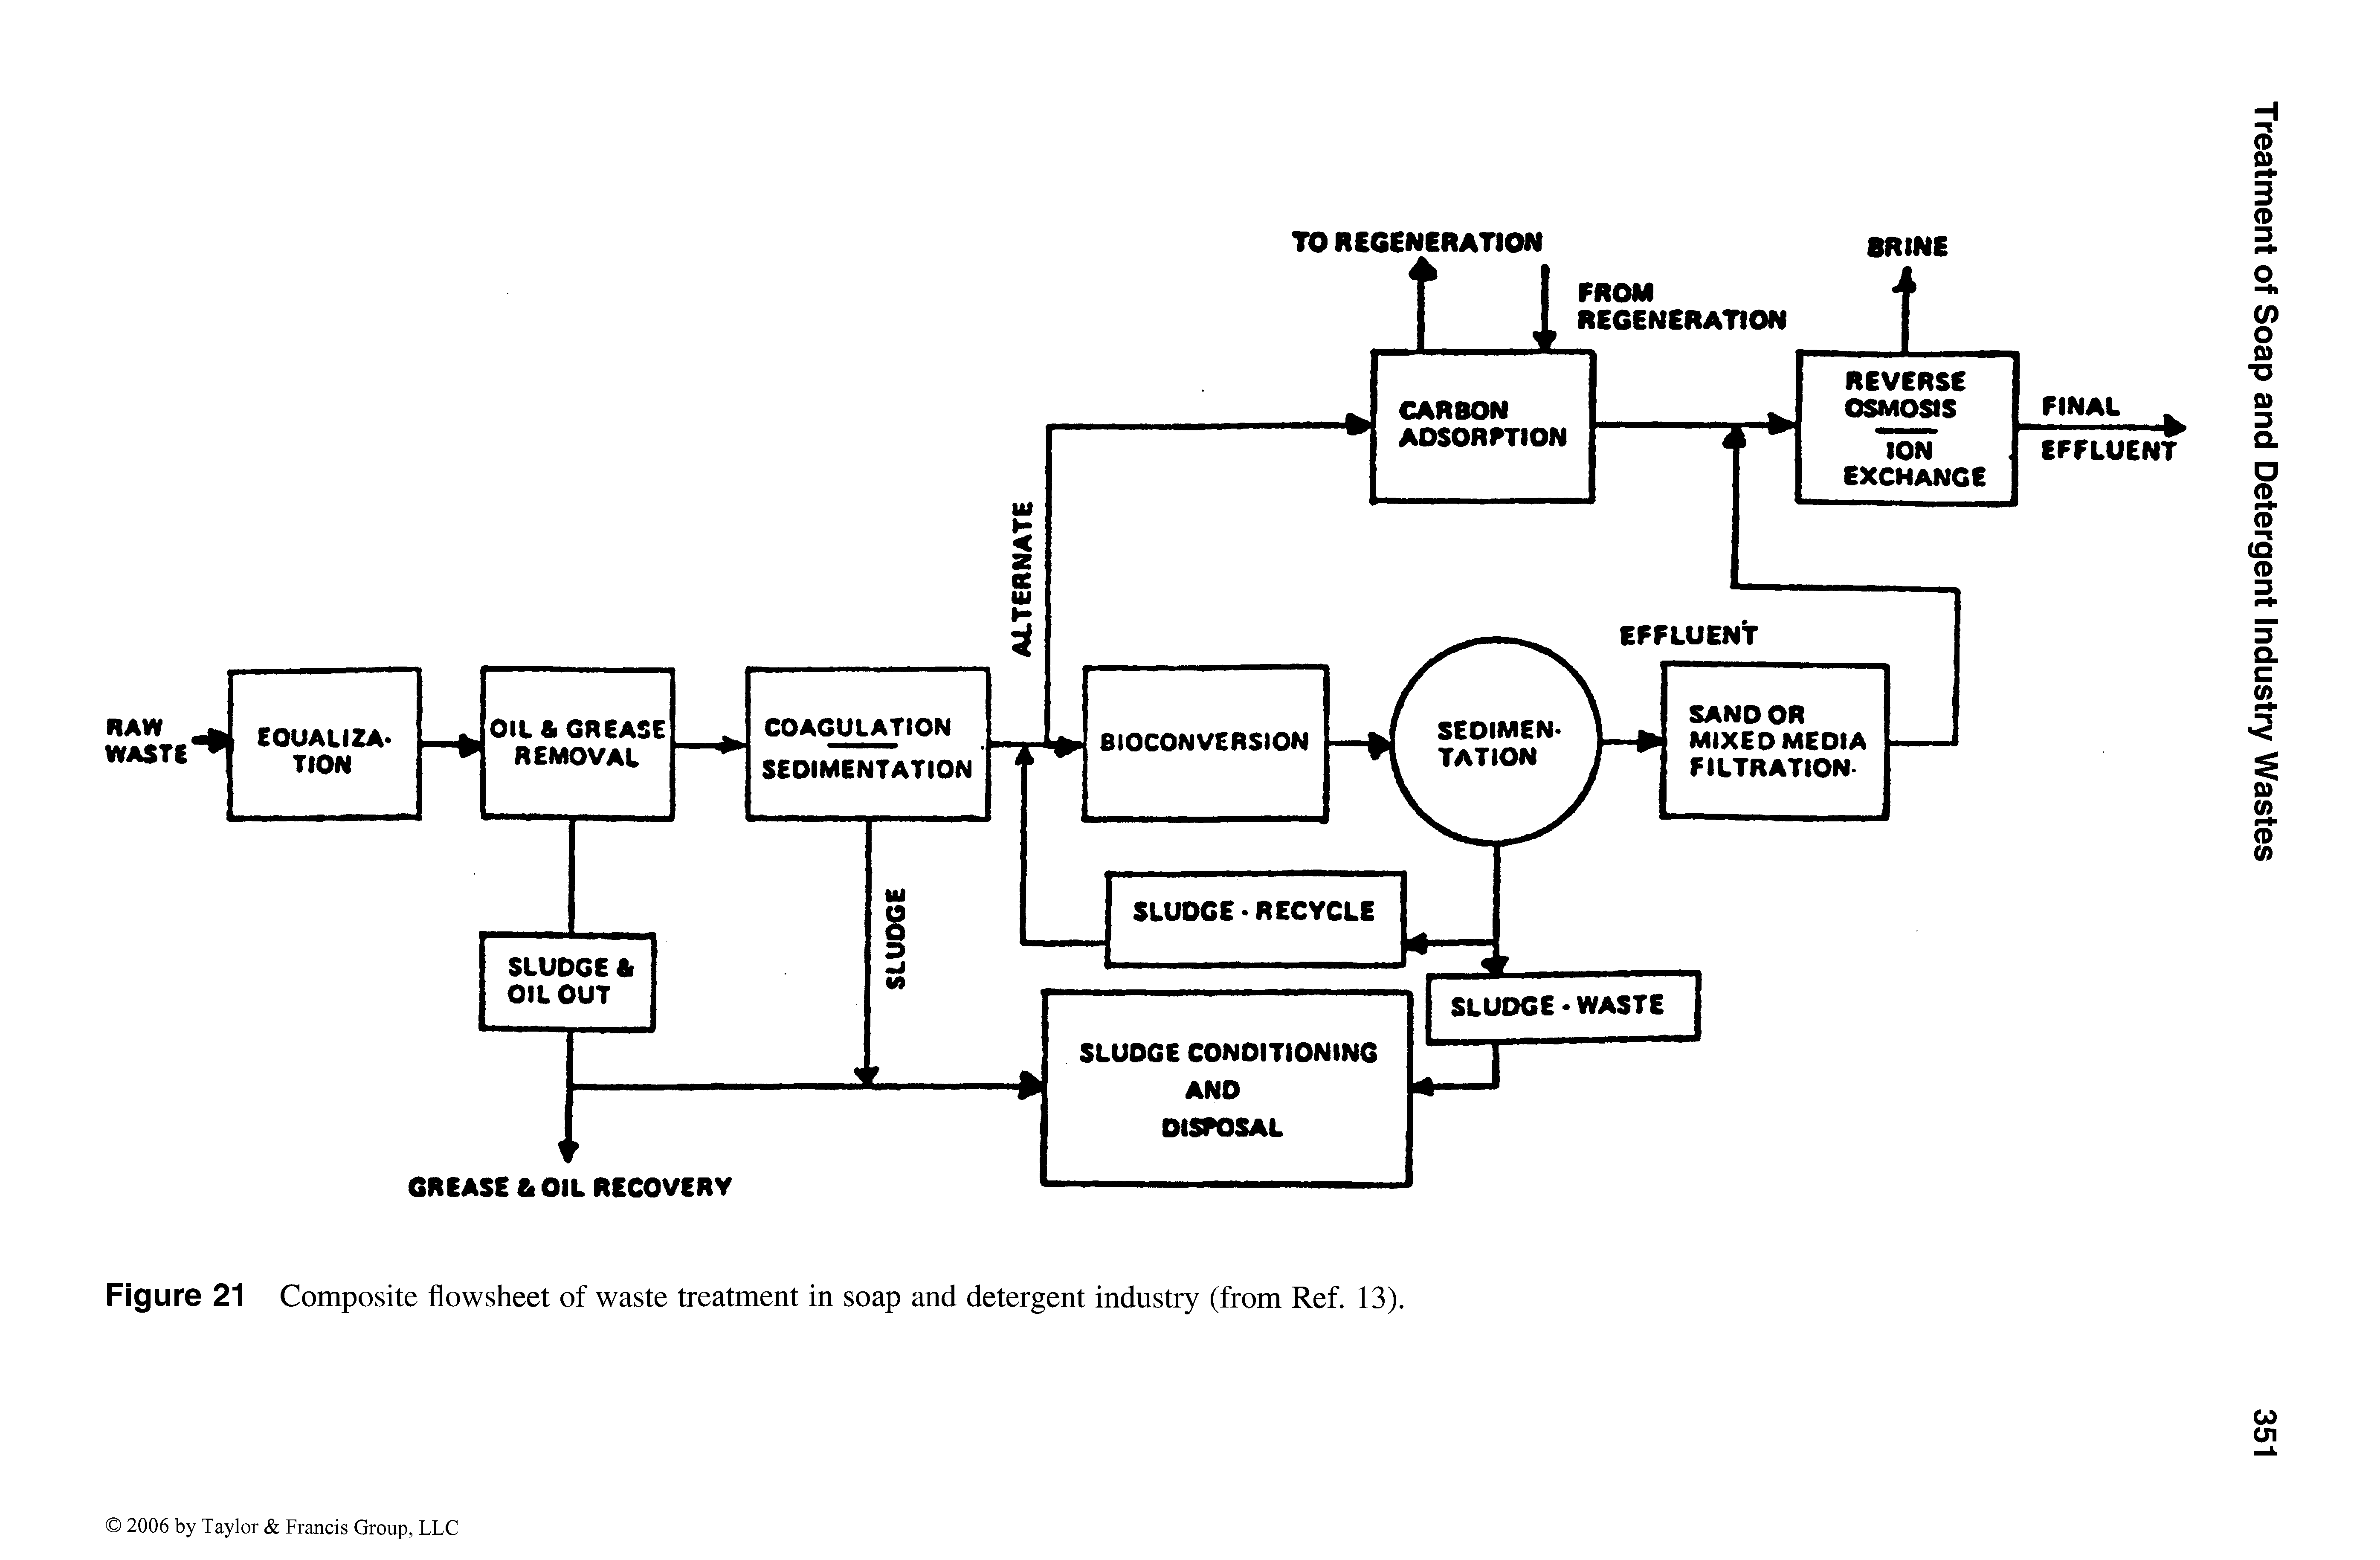 Figure 21 Composite flowsheet of waste treatment in soap and detergent industry (from Ref. 13).